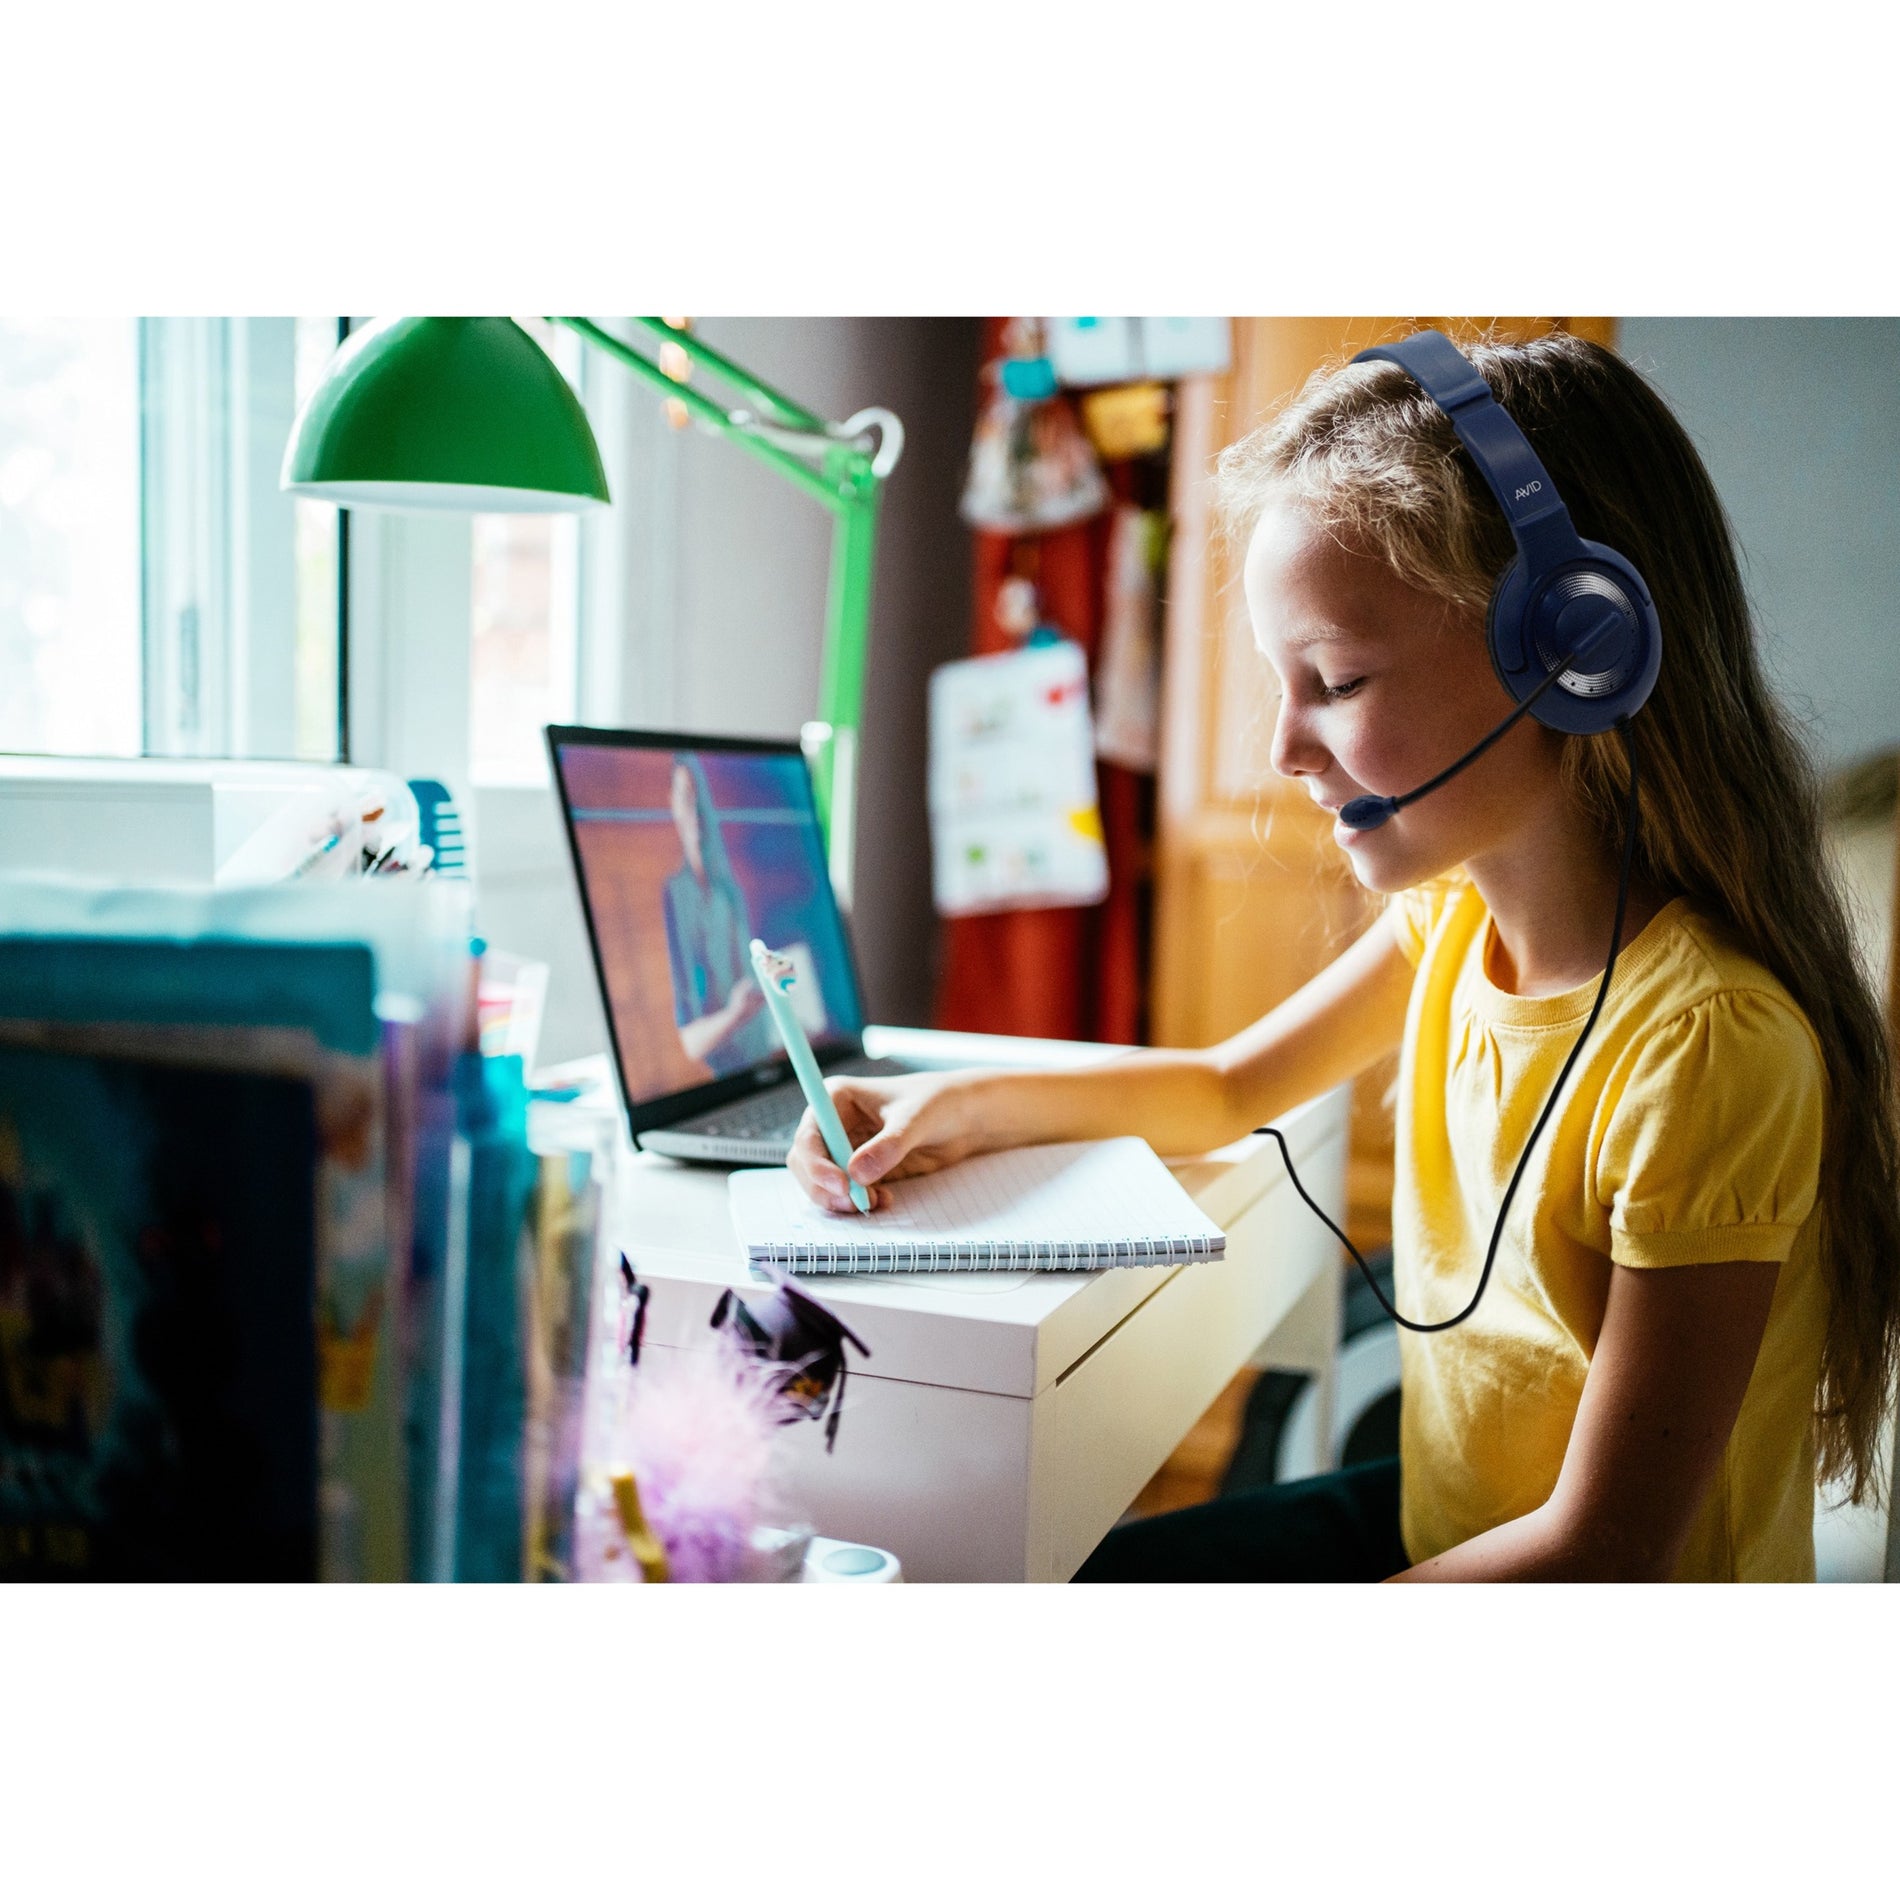 Avid Education 2AE55BL AE-55 Headset, Over-the-head Binaural Stereo Headset with Passive Noise Cancellation